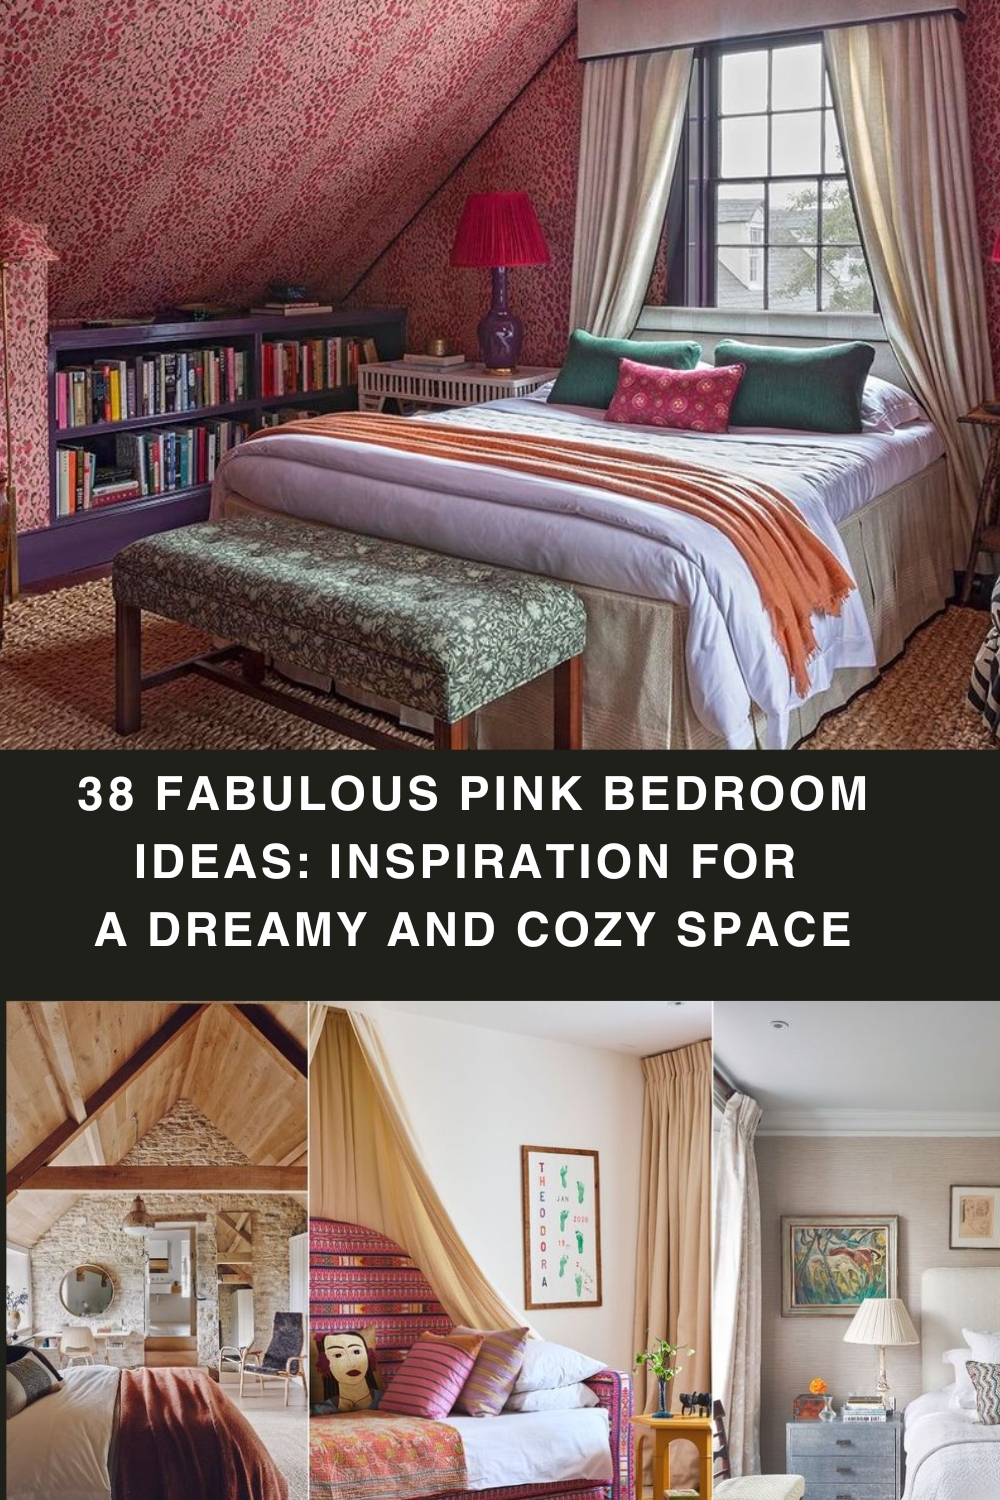 38 Fabulous Pink Bedroom Ideas: Inspiration for a Dreamy and Cozy Space pin